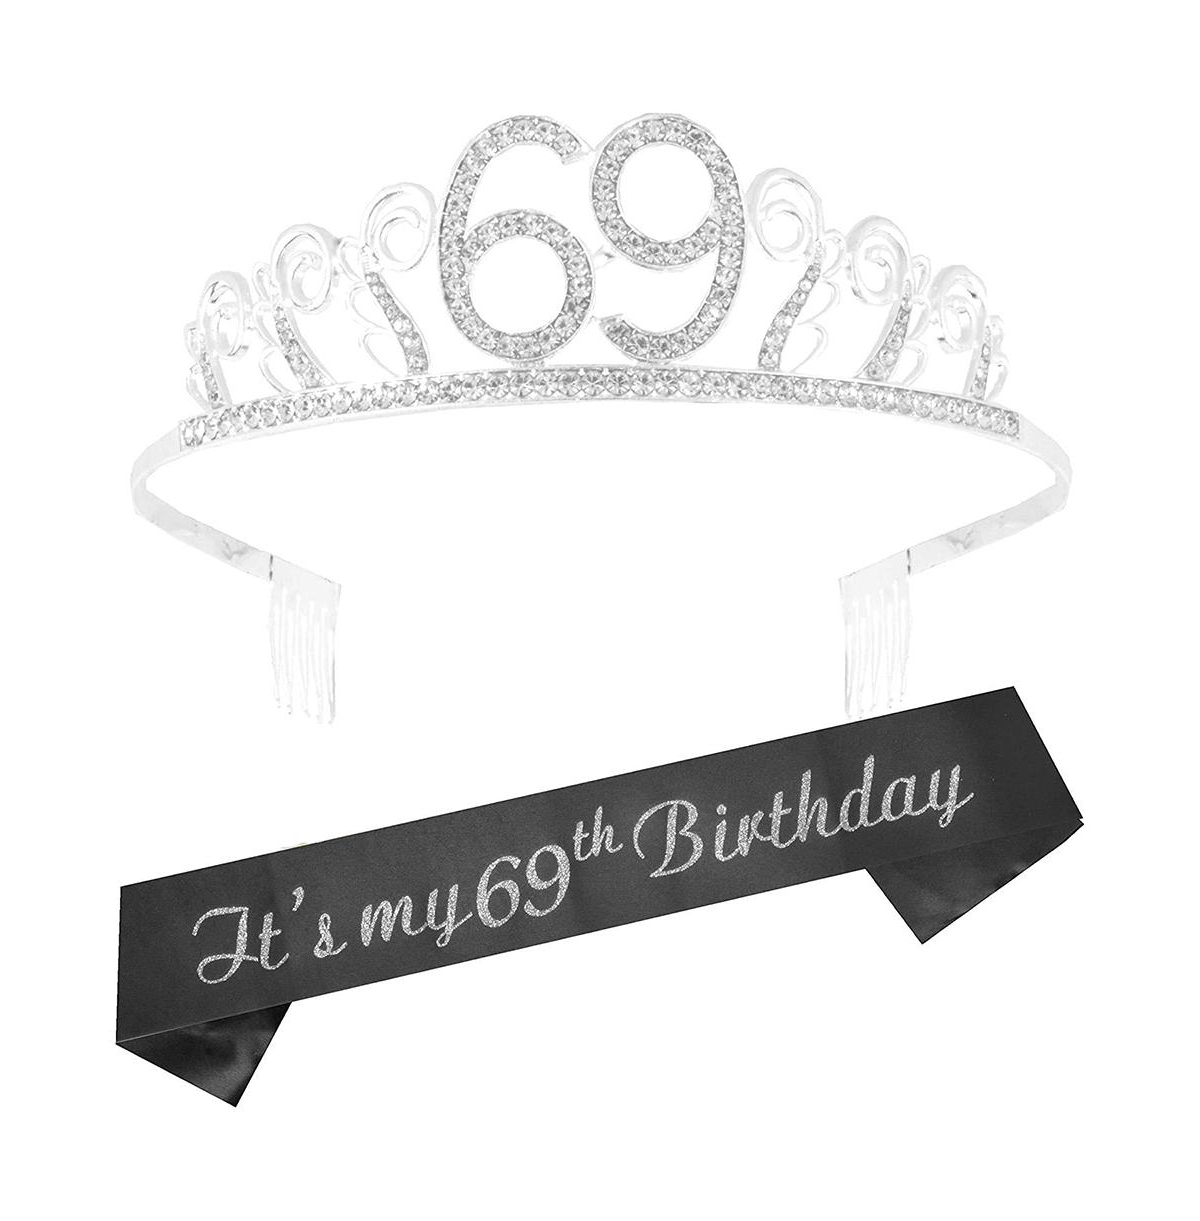 69th Birthday Women's Glitter Sash and Silver Waves Rhinestone Metal Tiara Set - Fabulous Party Accessories and Gift for Her Celebrating 69 Years - Si